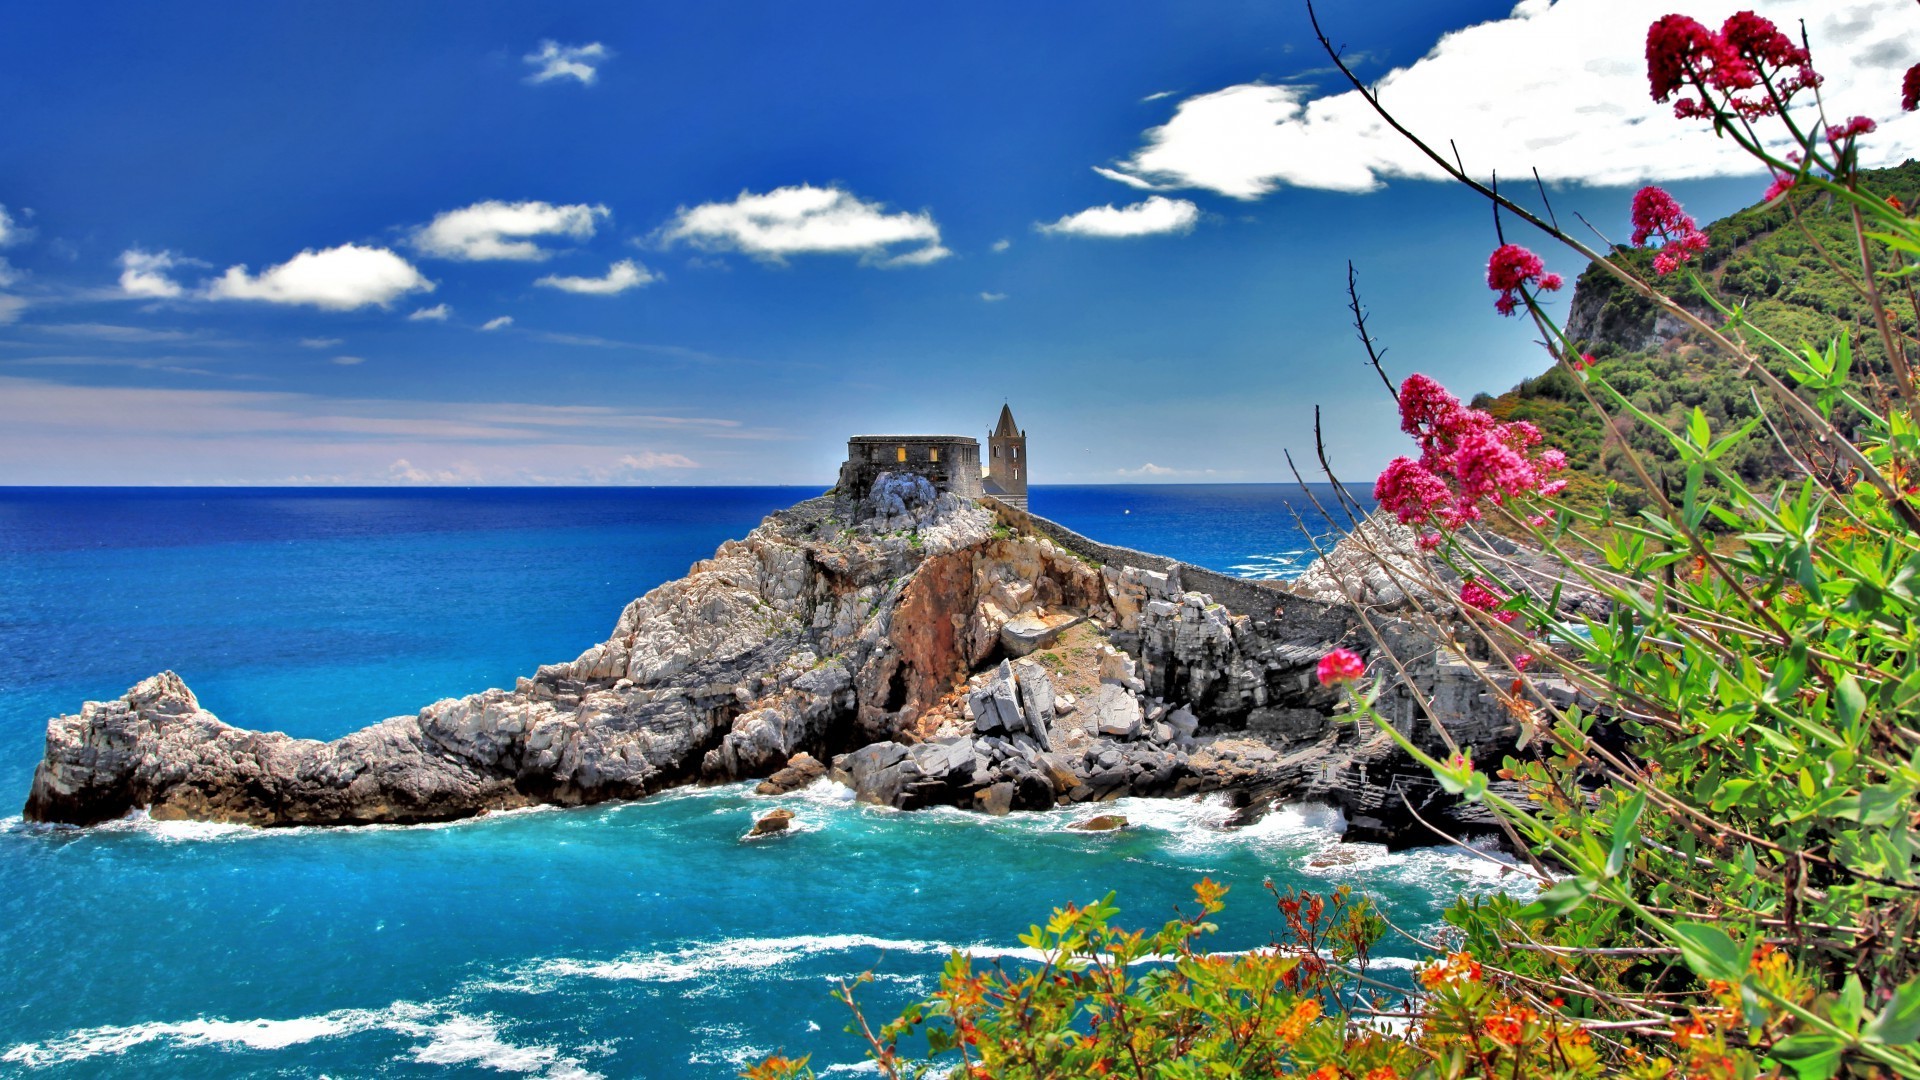 nature, Landscape, Clouds, Trees, Cinque Terre, Italy, Rock, Coast, Castle, Architecture, Tower, Sea, Branch, Leaves, Flowers, Waves, Summer, Horizon, Cliff Wallpaper